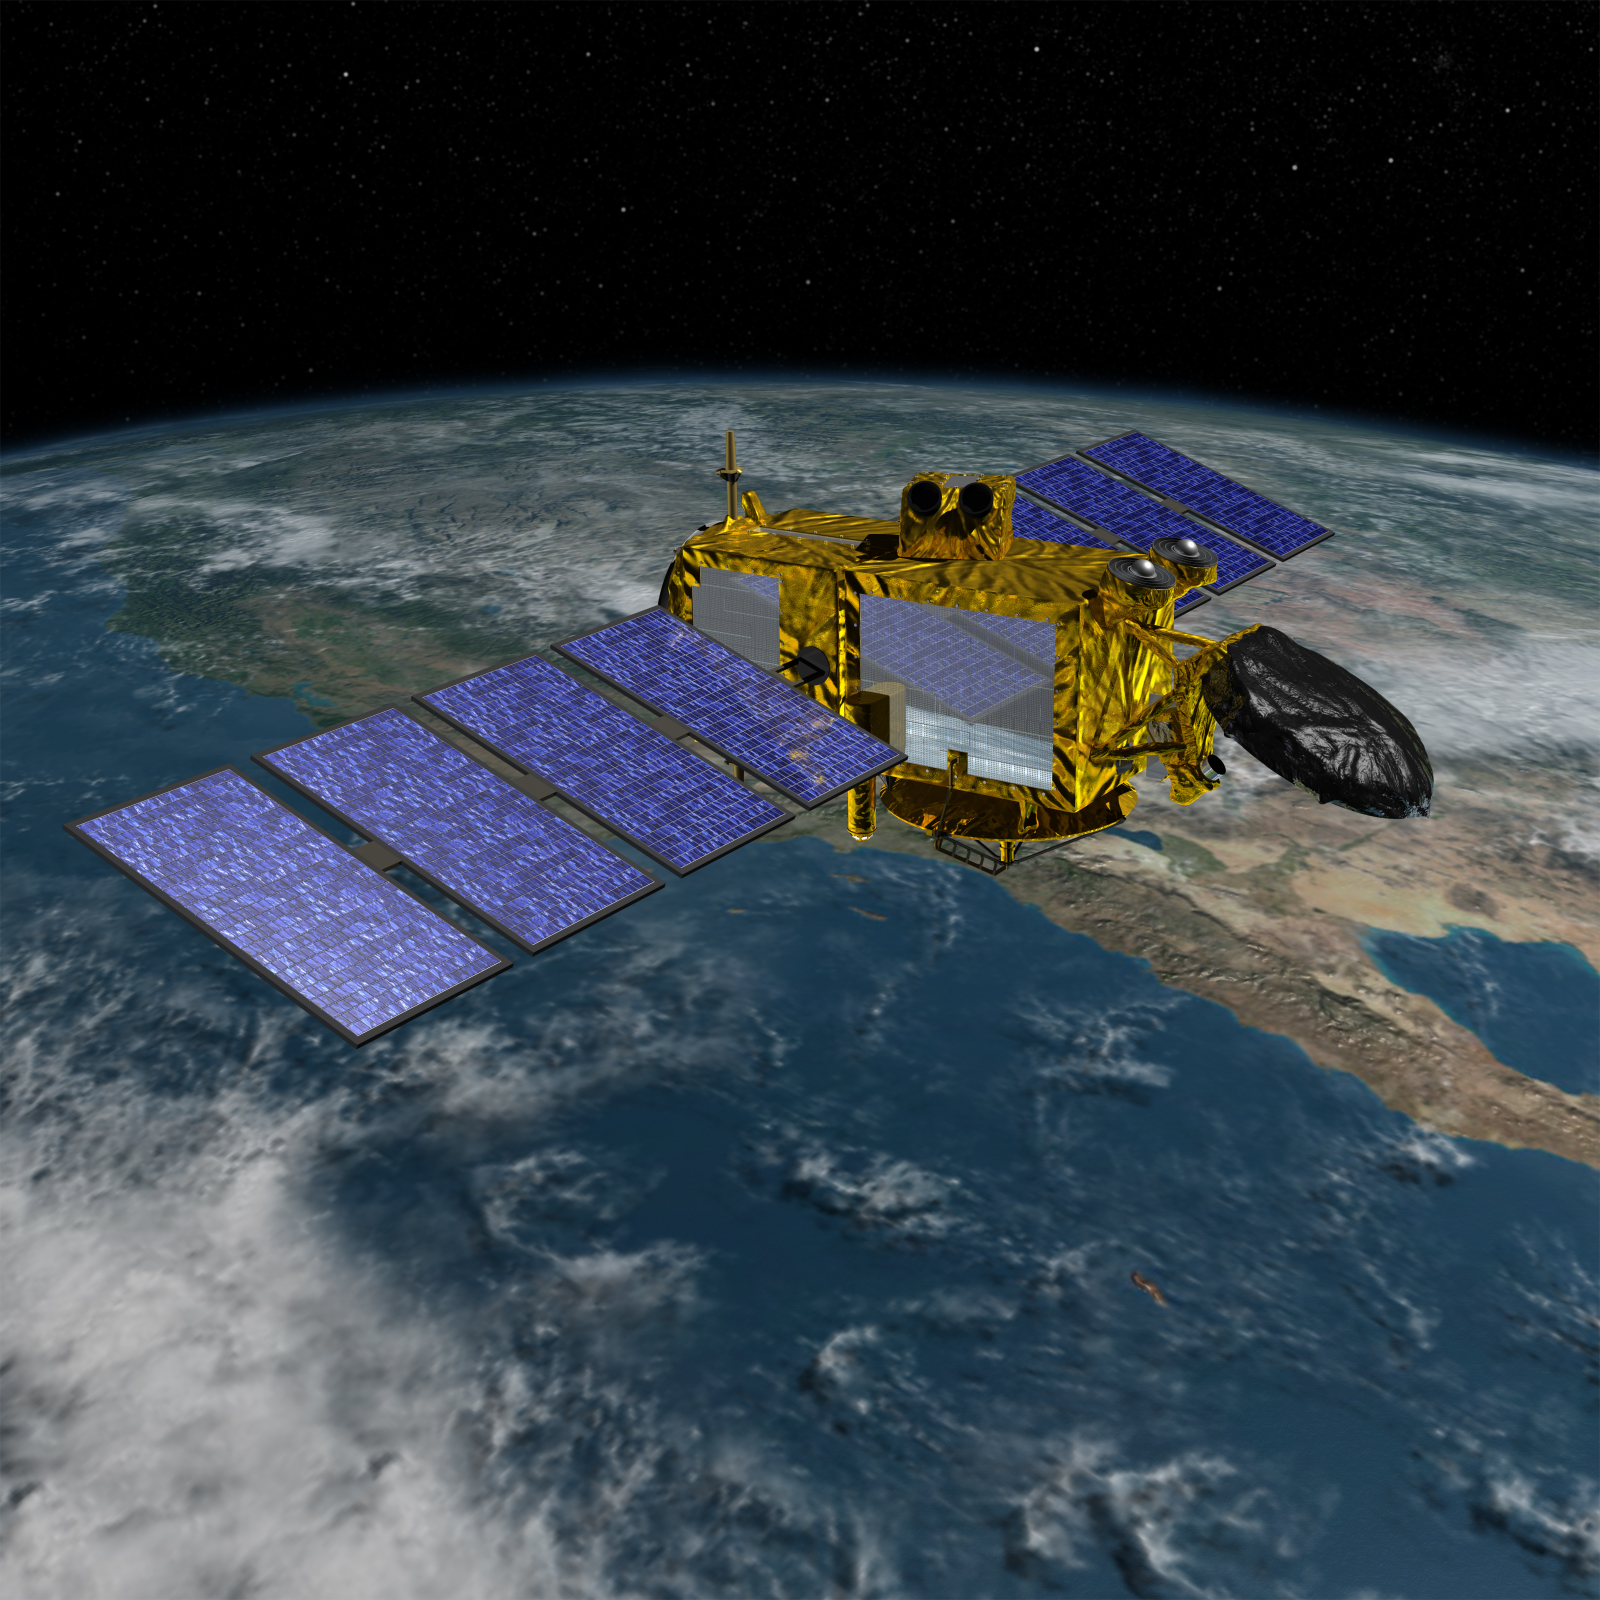 The nonwovens form part of the recently-launched Jason-3 Earth observation satellite. Image courtesy NASA/JPL-Caltech.